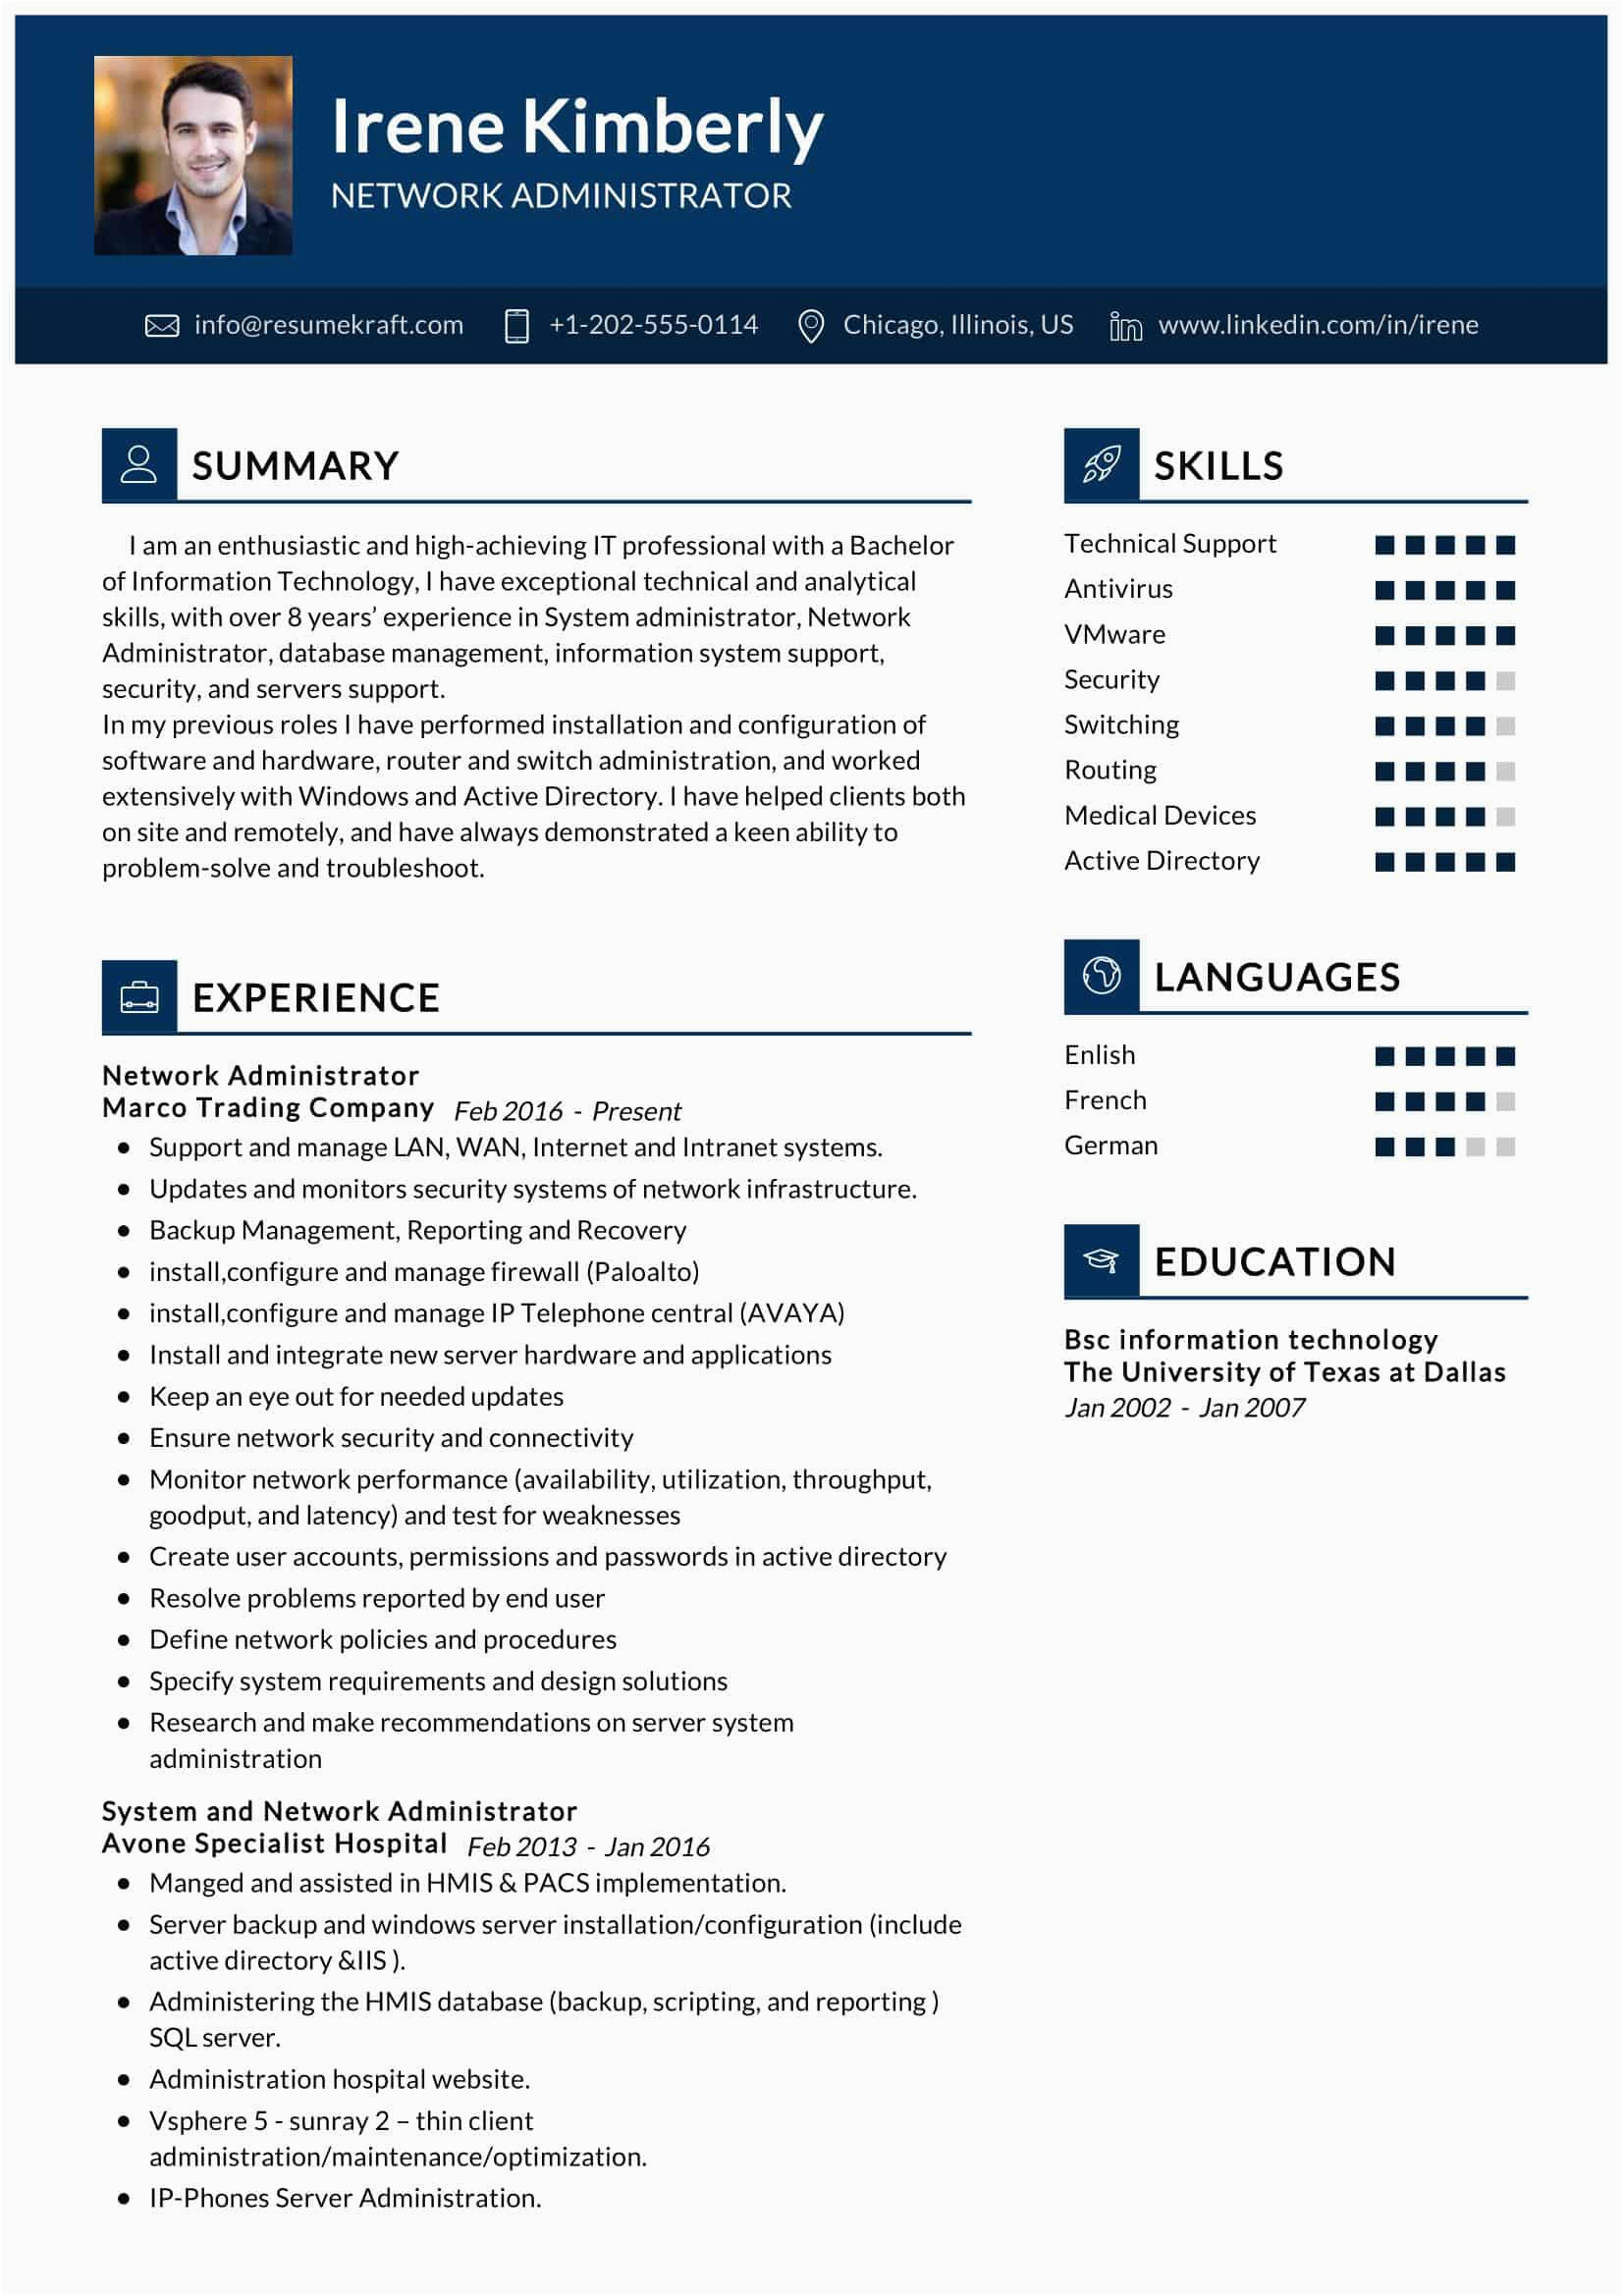 Systems and Network Administrator Resume Sample Network Administrator Resume Sample 2022